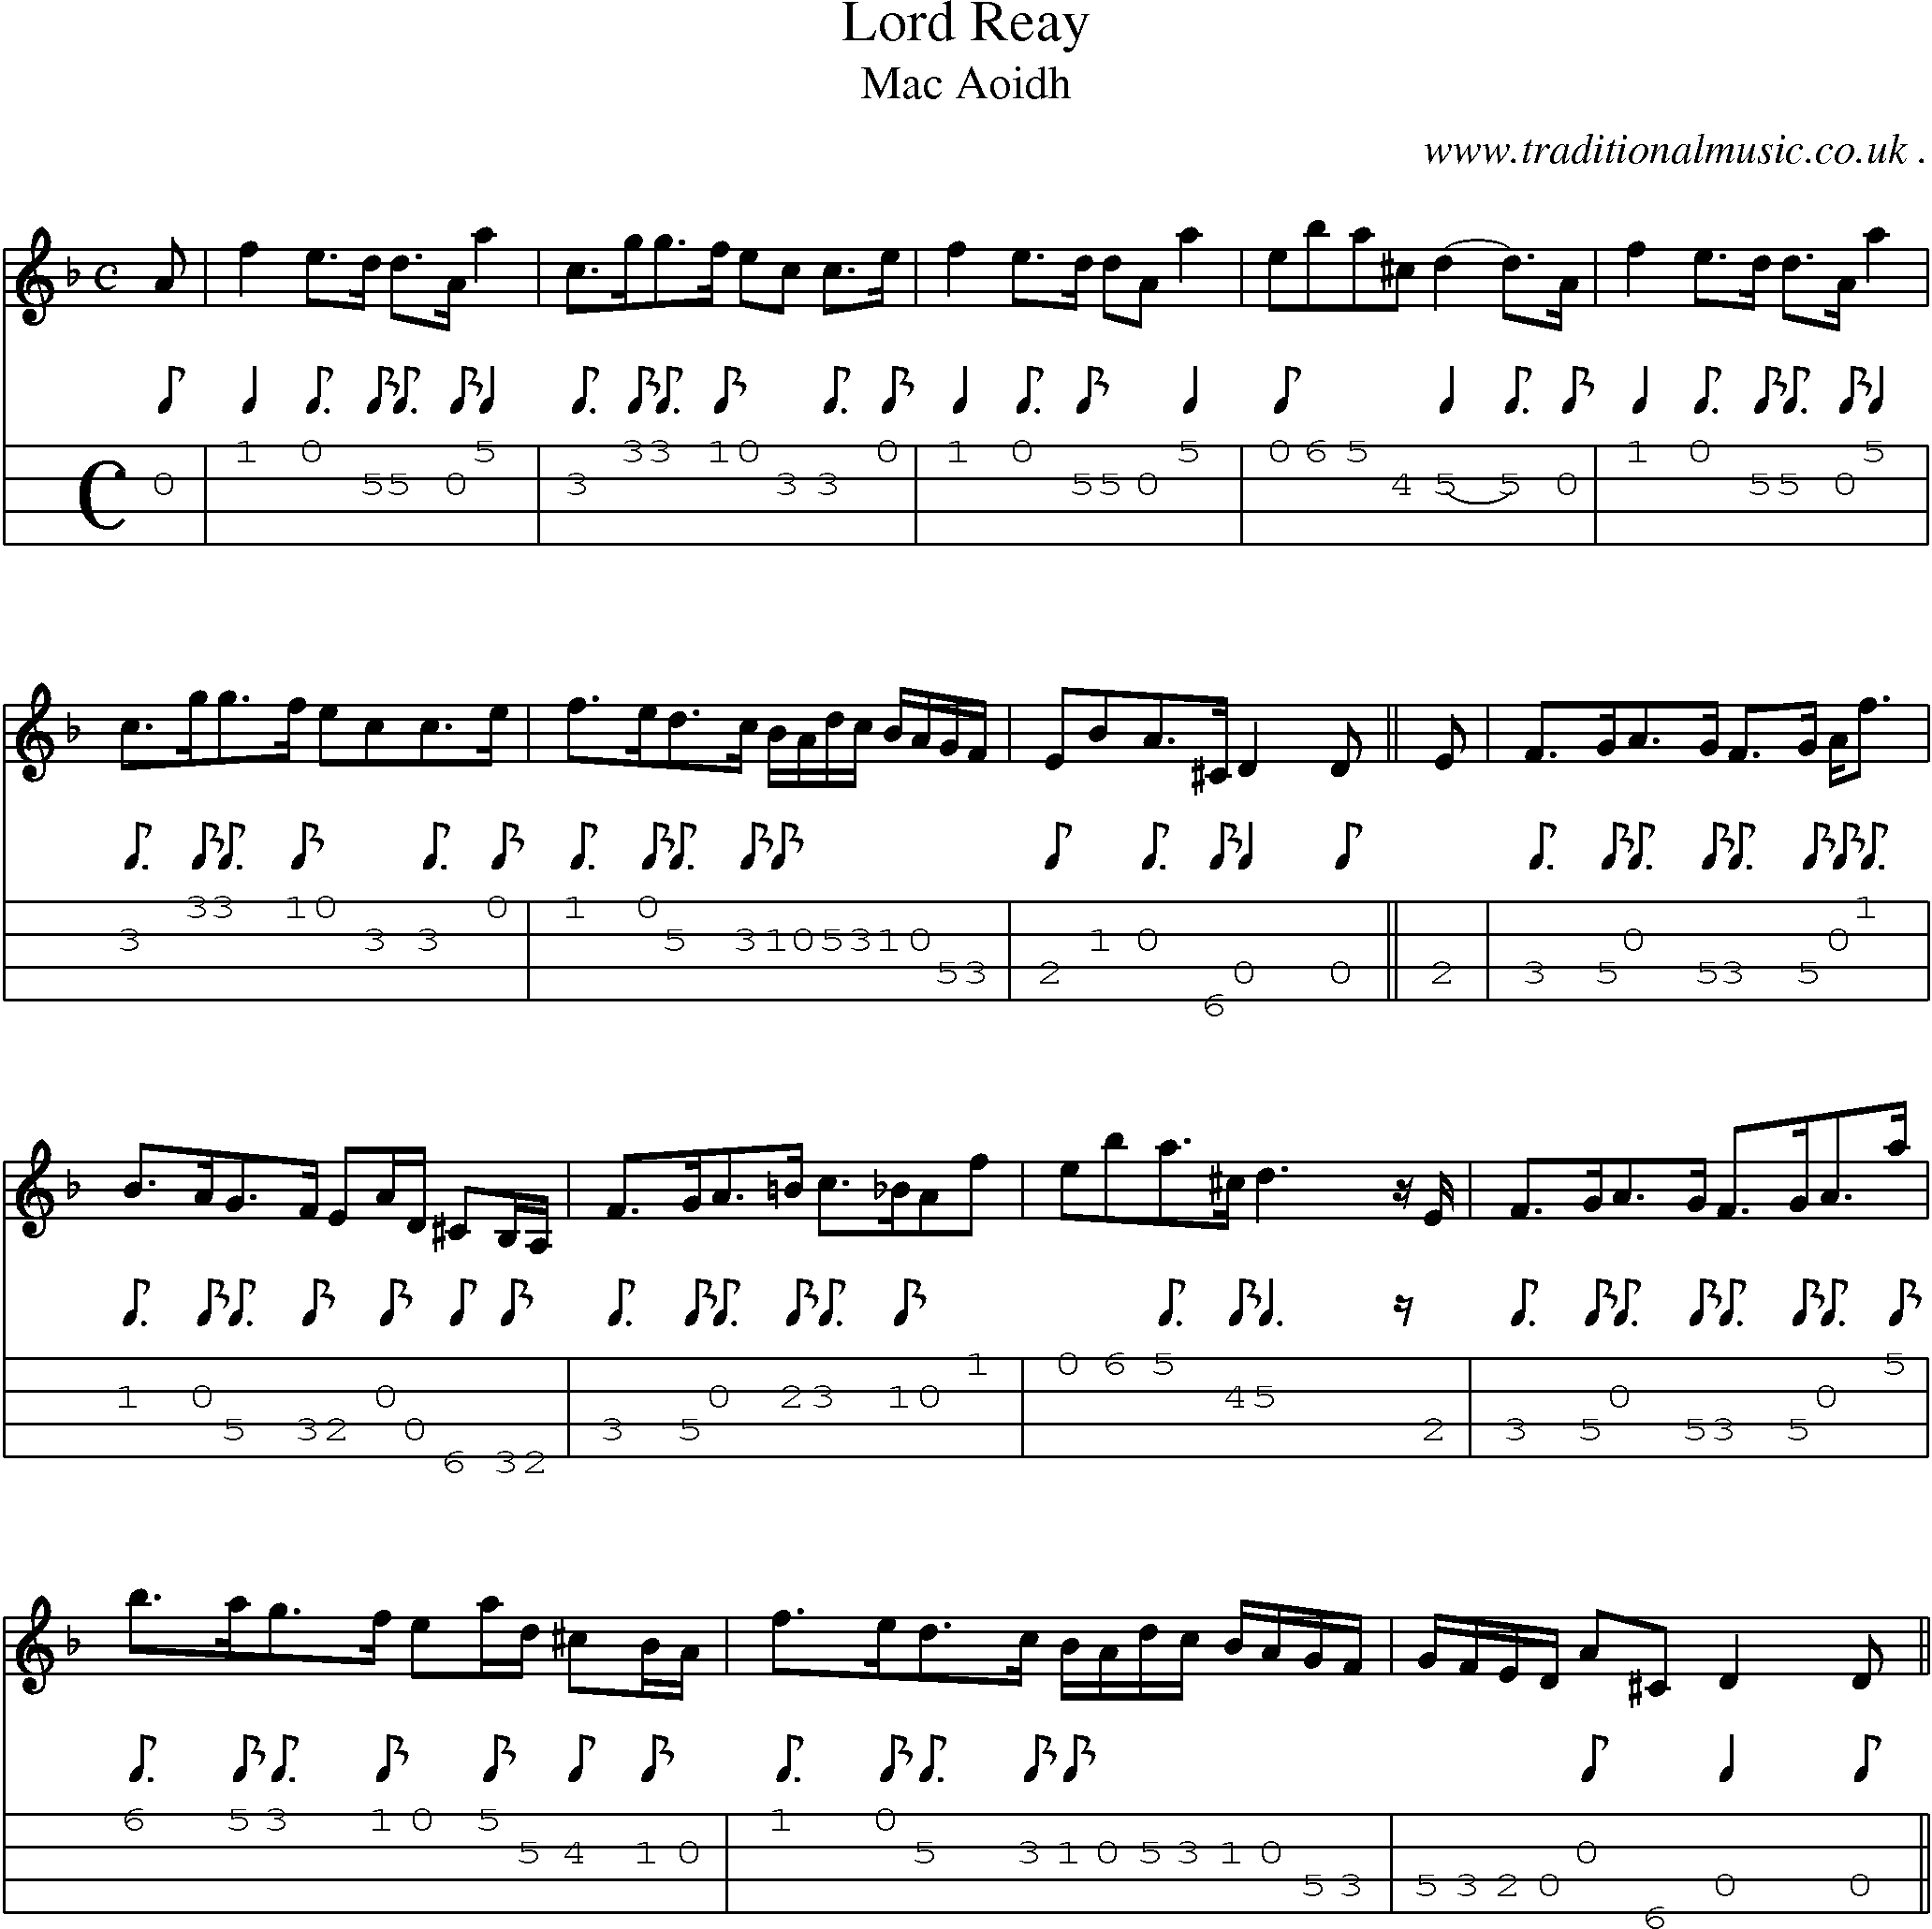 Sheet-music  score, Chords and Mandolin Tabs for Lord Reay